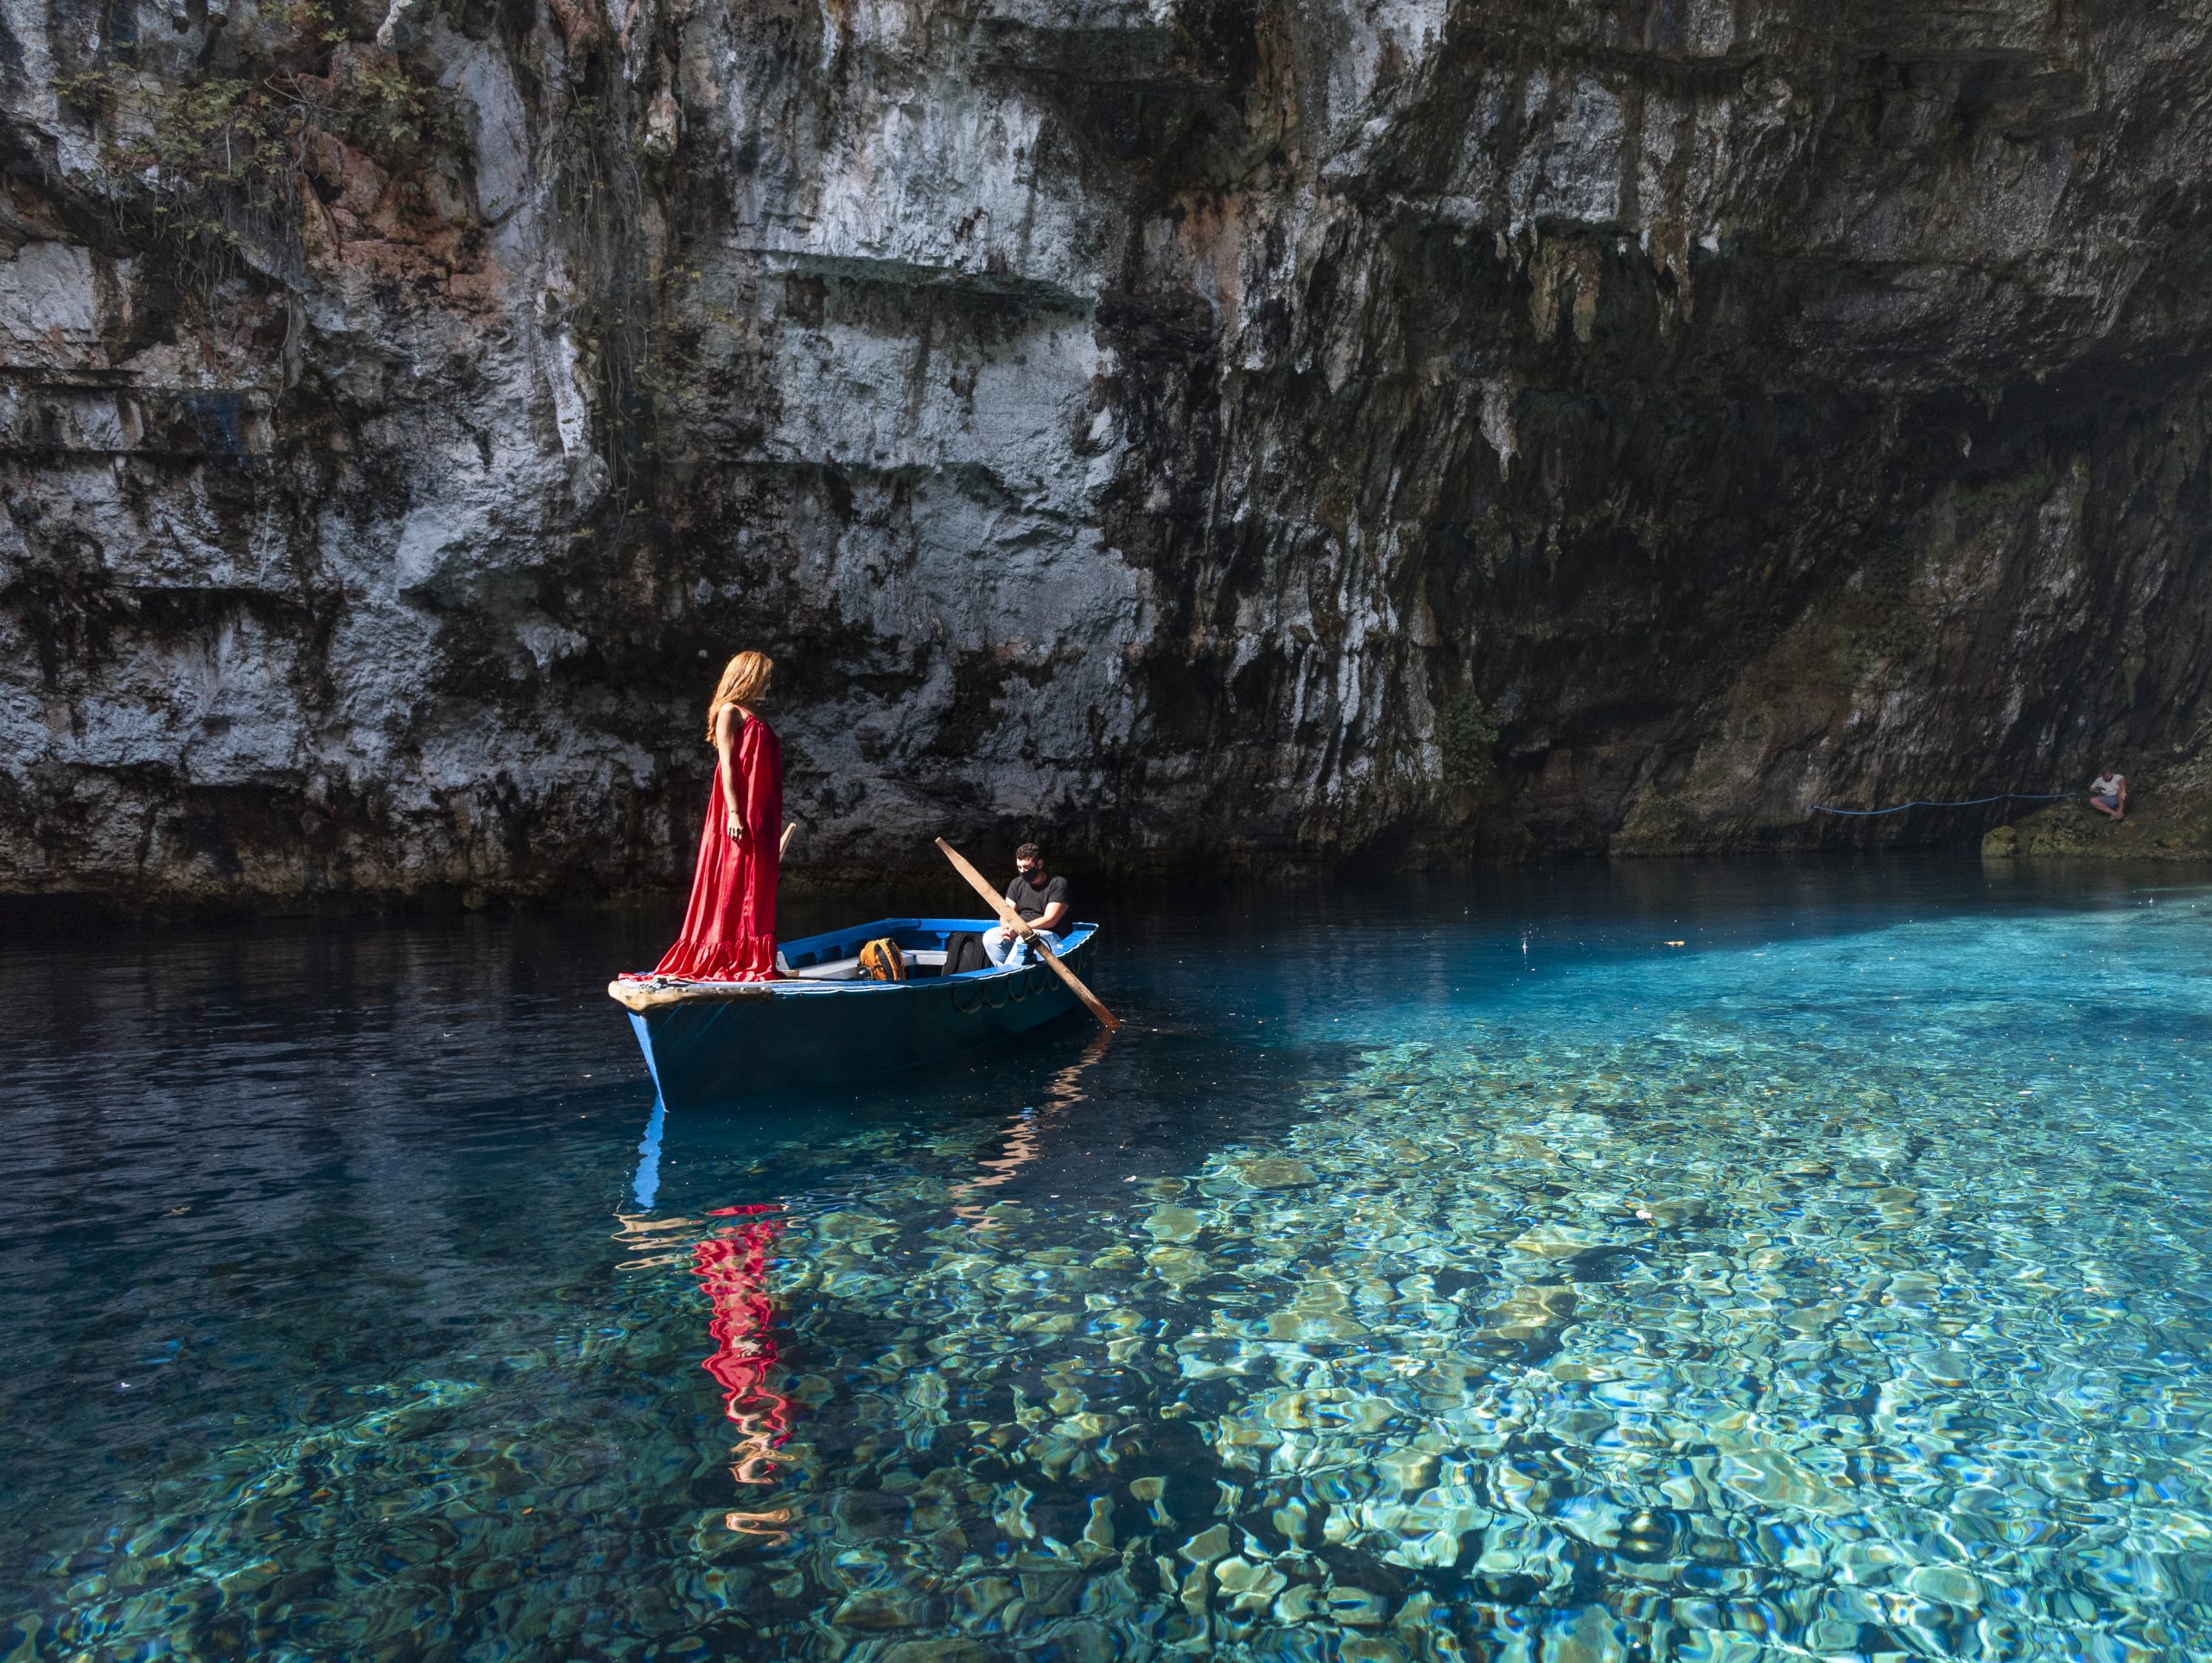 A timeless natural wonder in Kefalonia